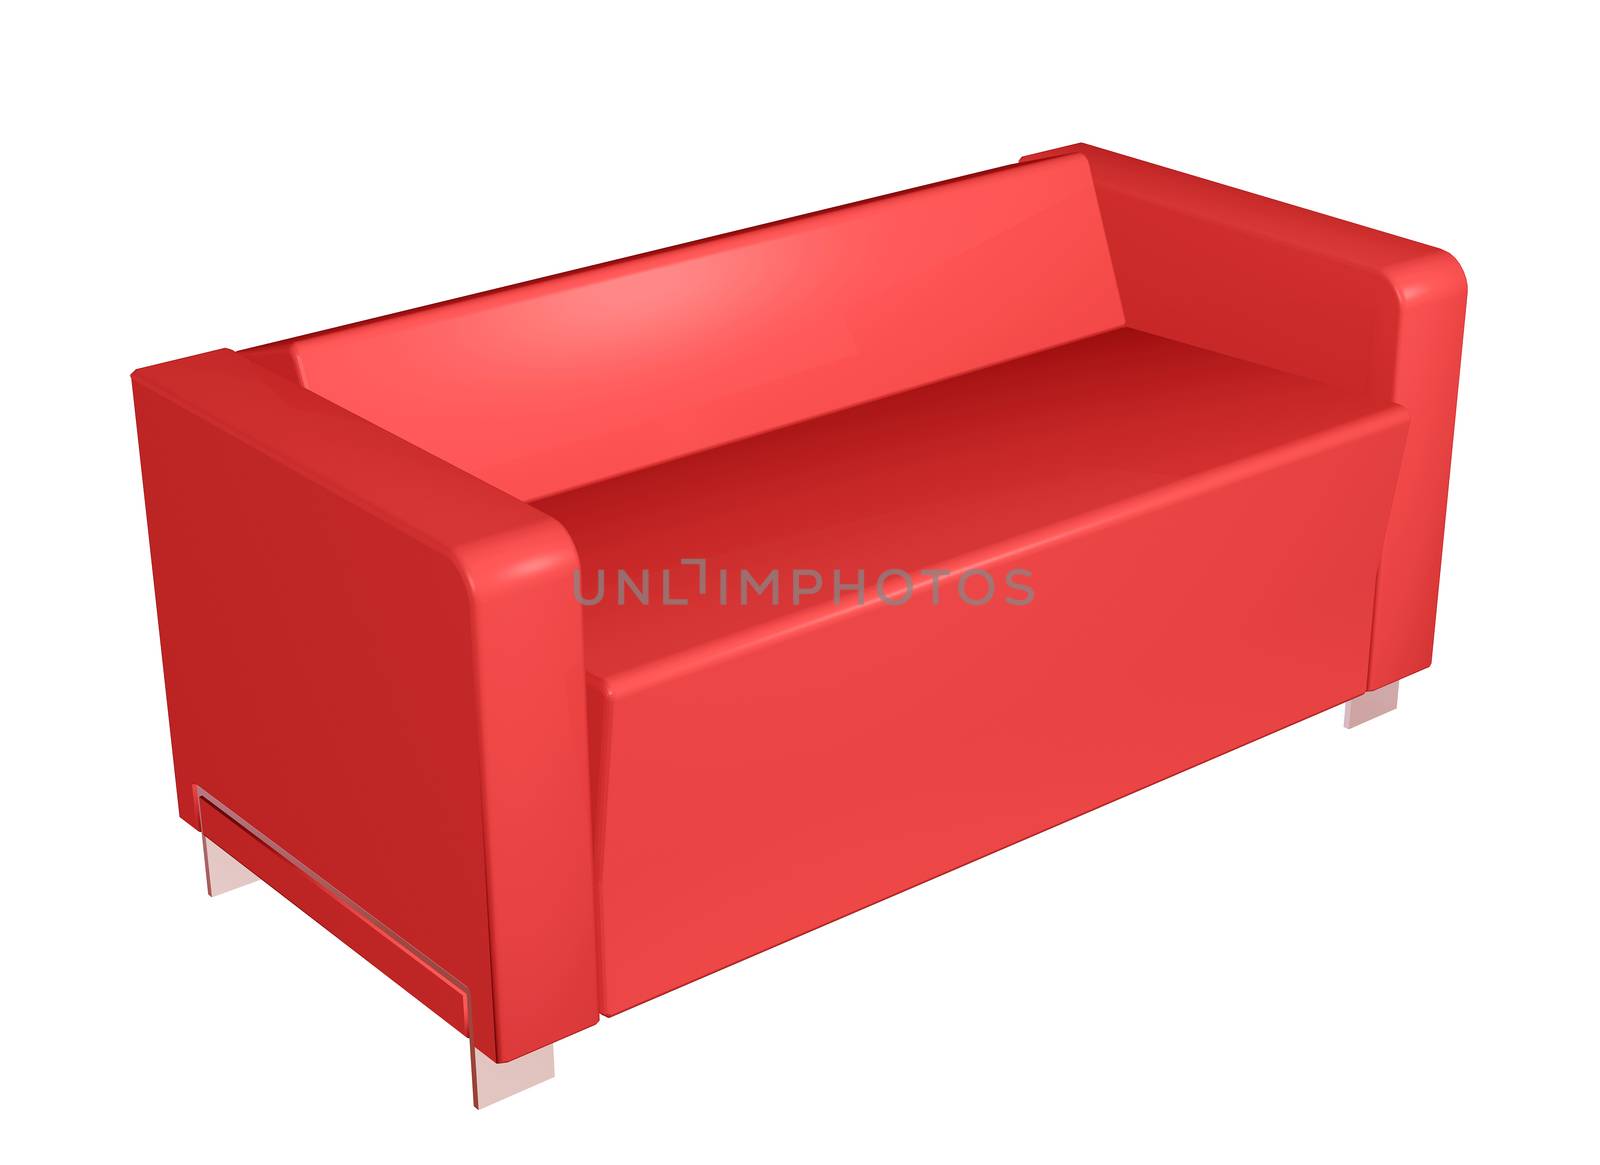 All-leather red sofa, 3D illustration by Morphart